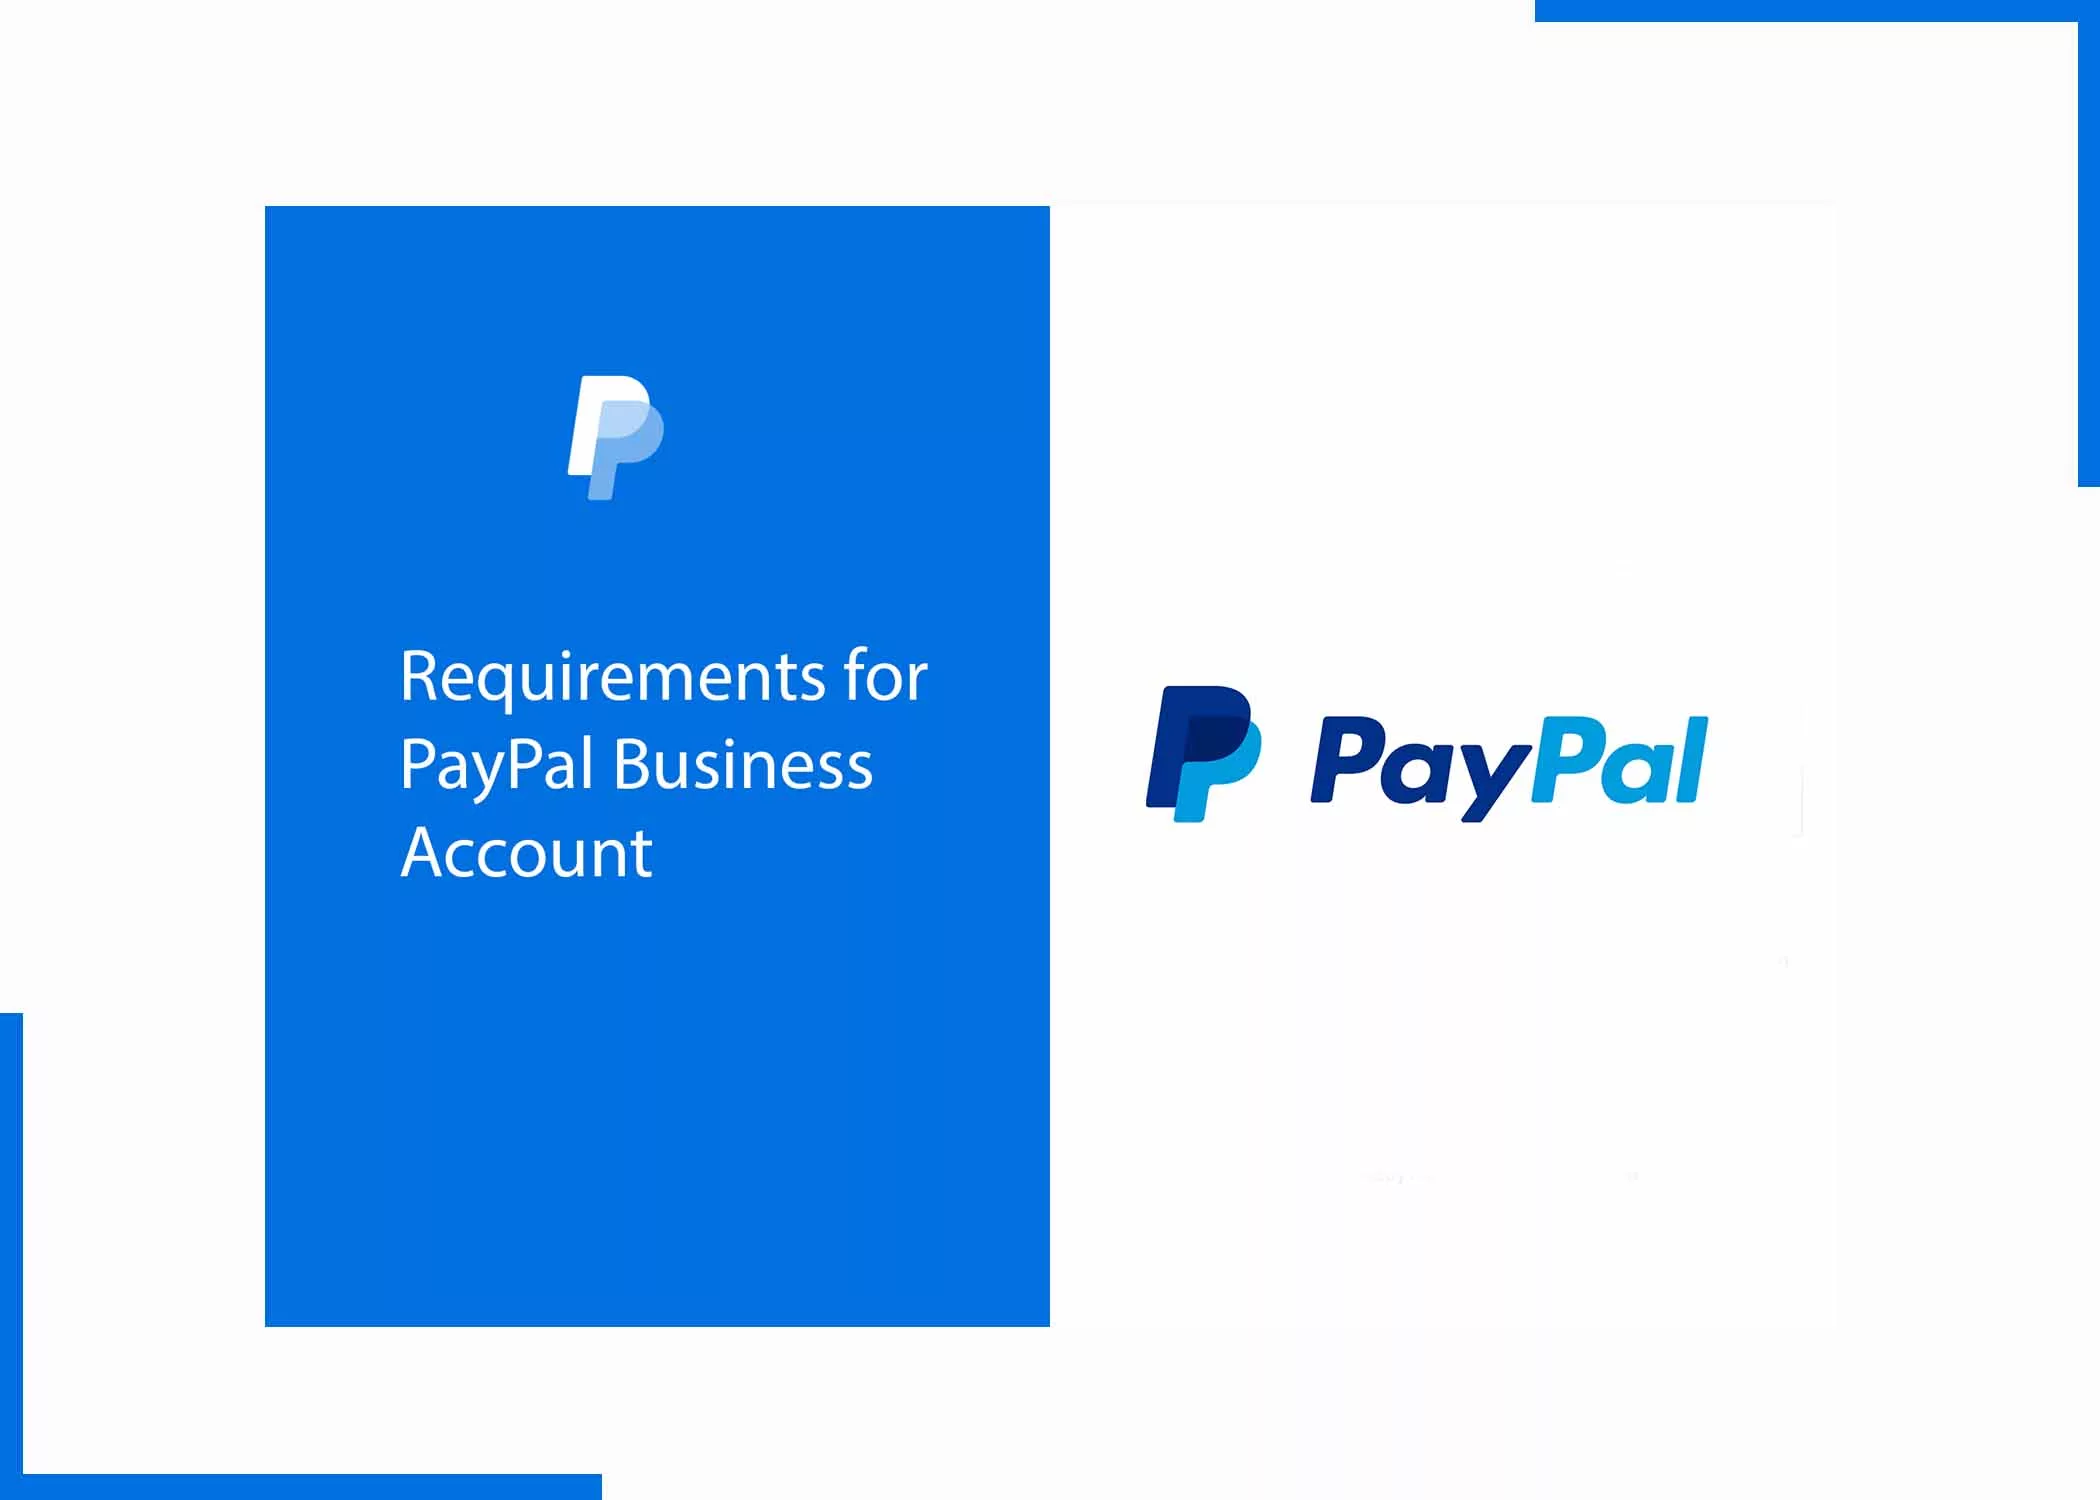 Requirements for PayPal Business Account